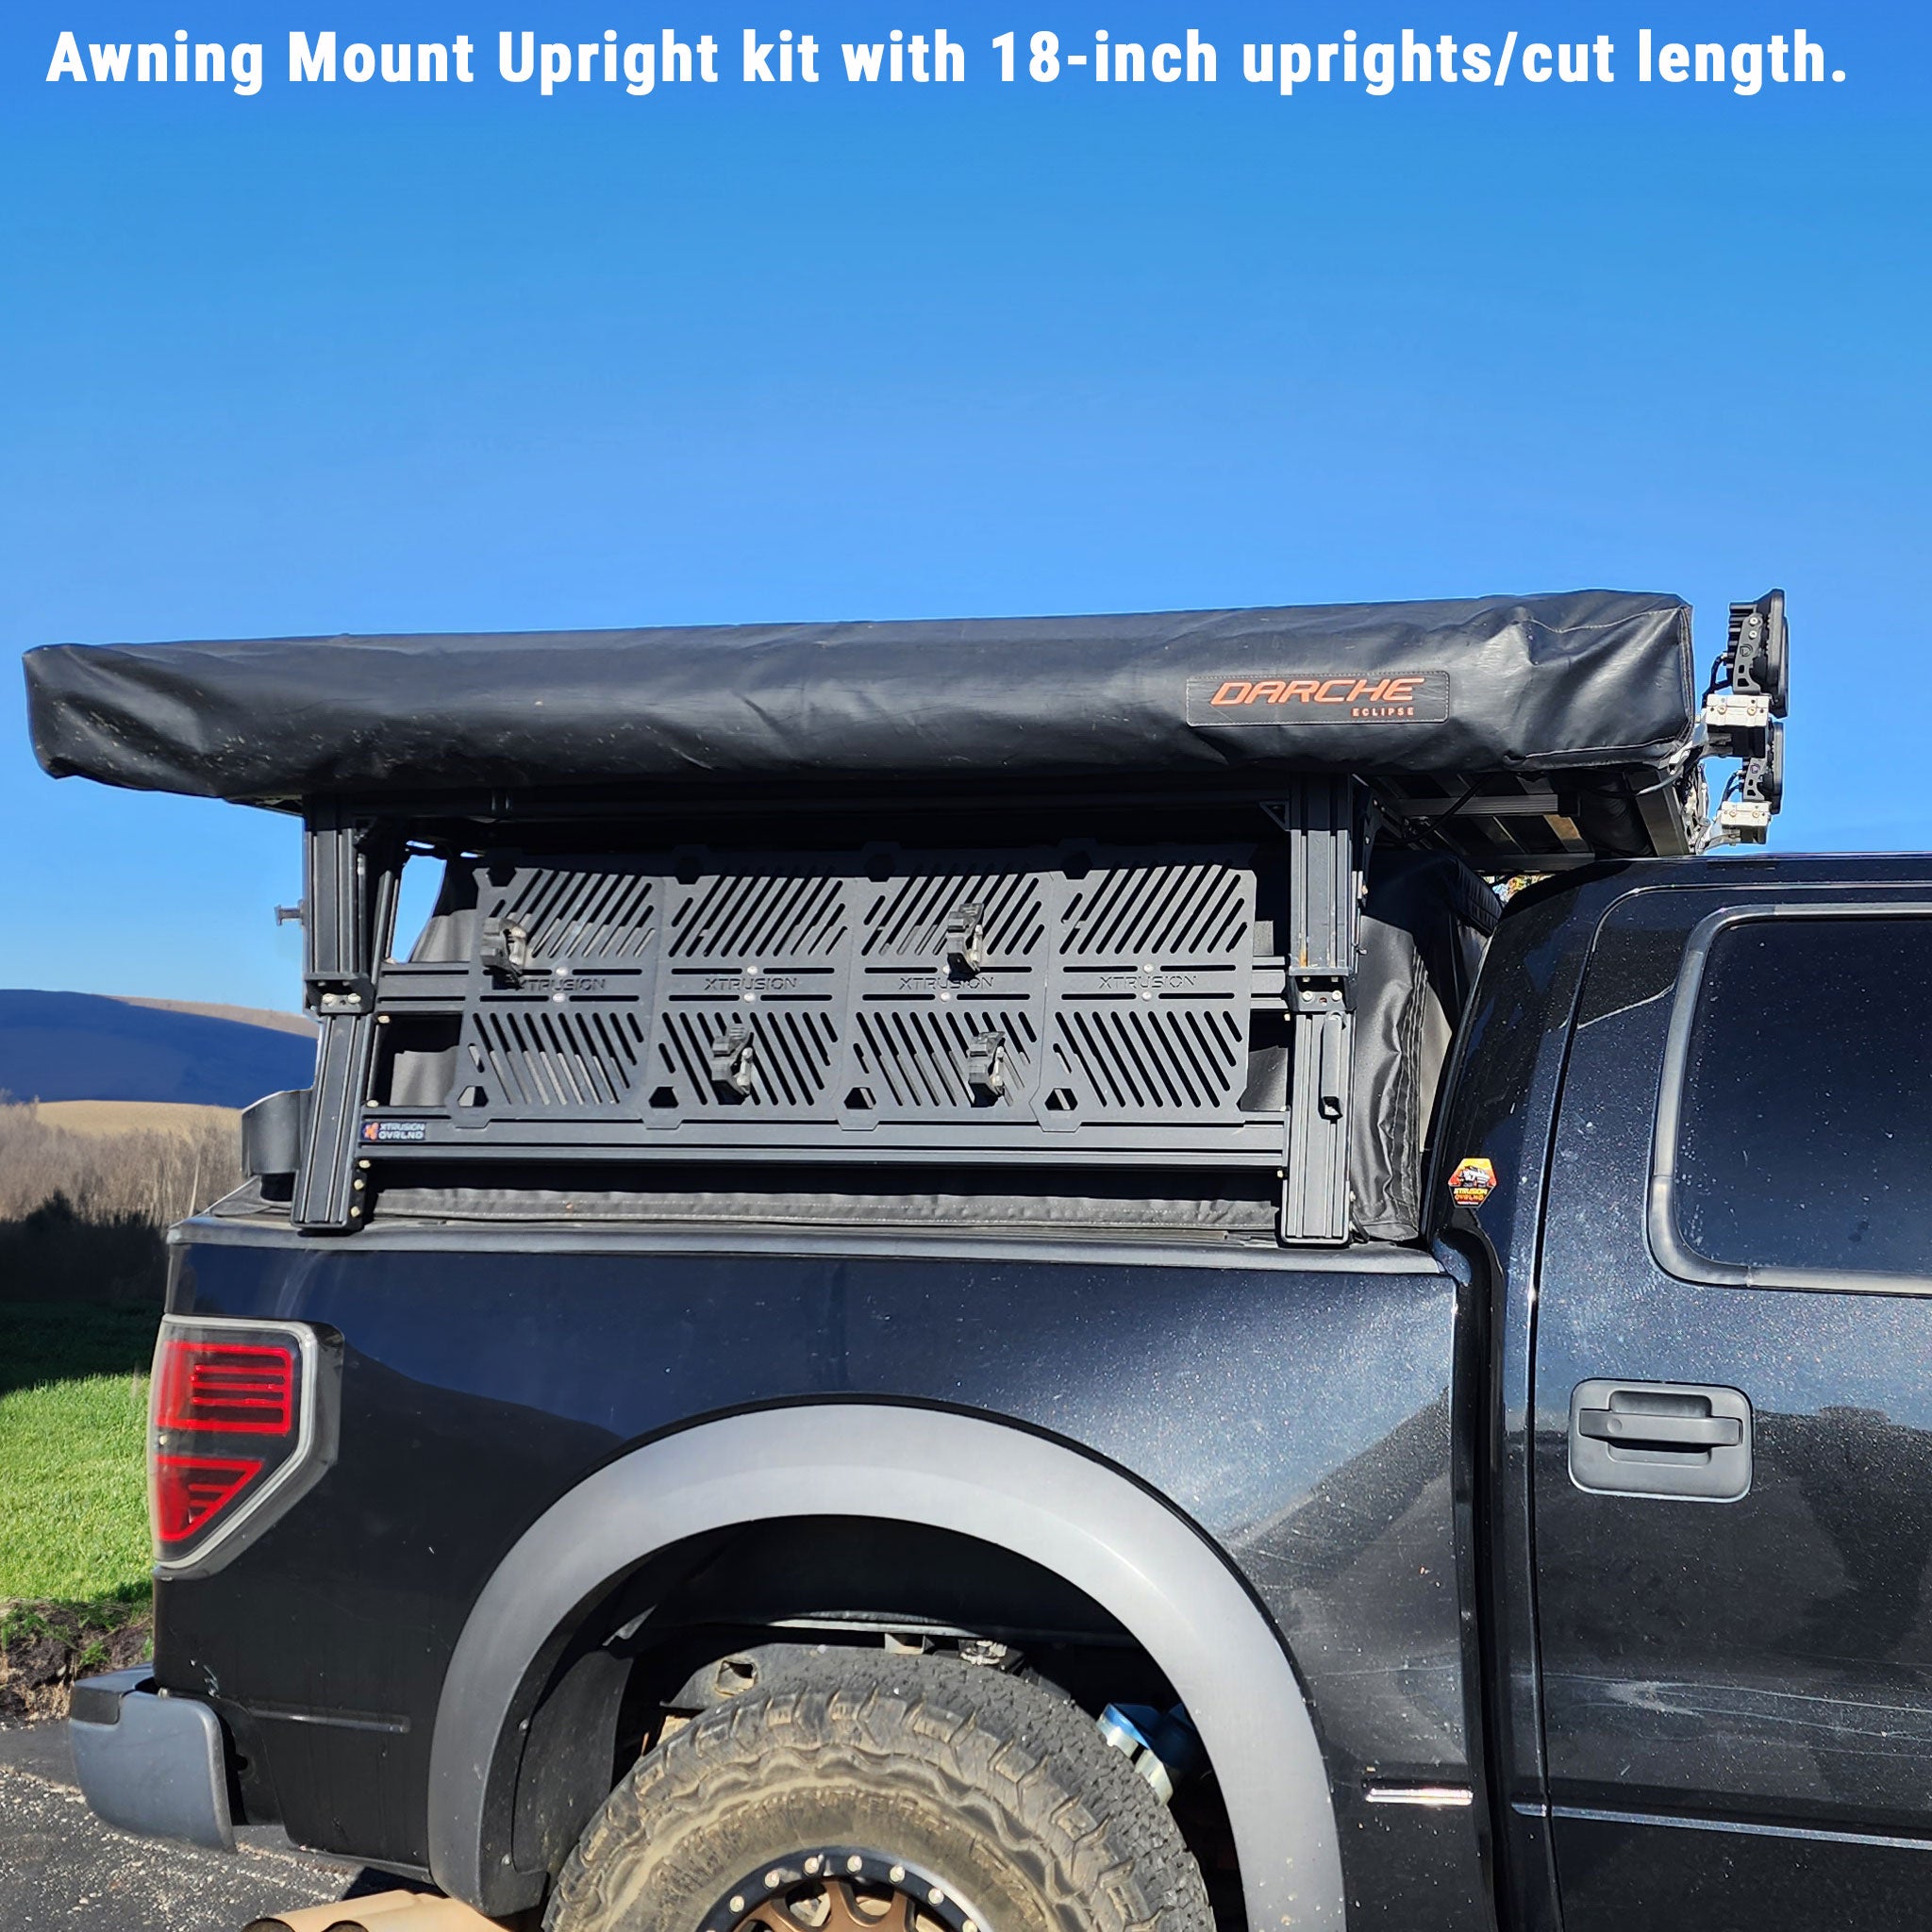 XTR Awning Mount Upright Sub-structure kit with 18-inch uprights, 270 Awning attached and on a full size Xtrusion truck bed rack at the 13.3 degree angle.